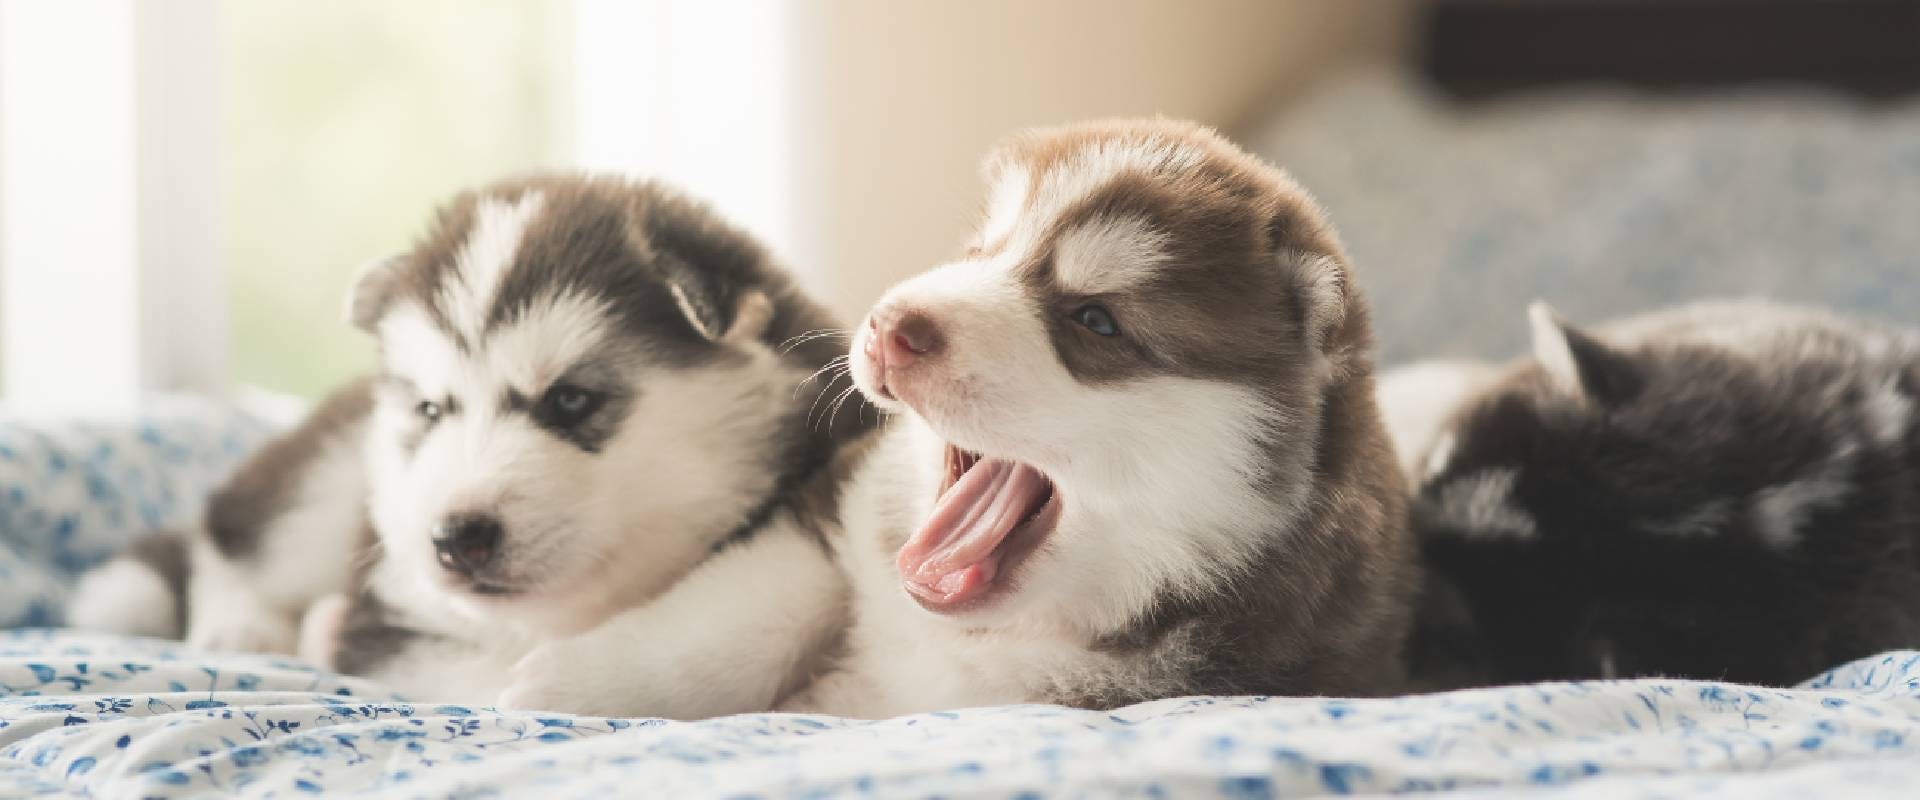  Siberian Husky puppies lying on a bed